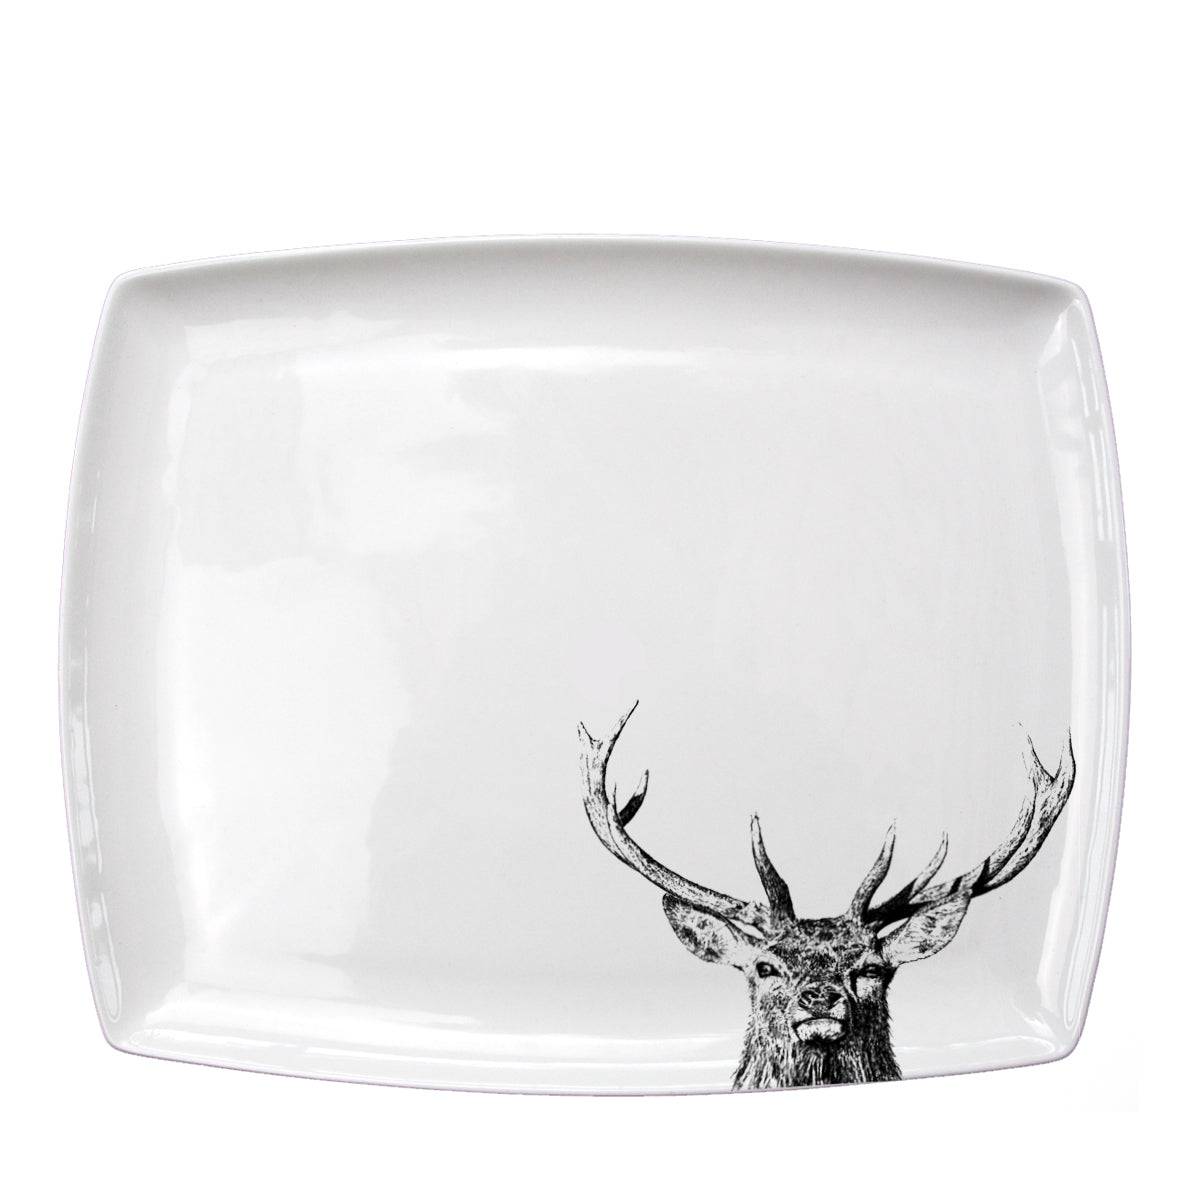 Majestic Stag Platter - Large for sale - Woodcock and Cavendish